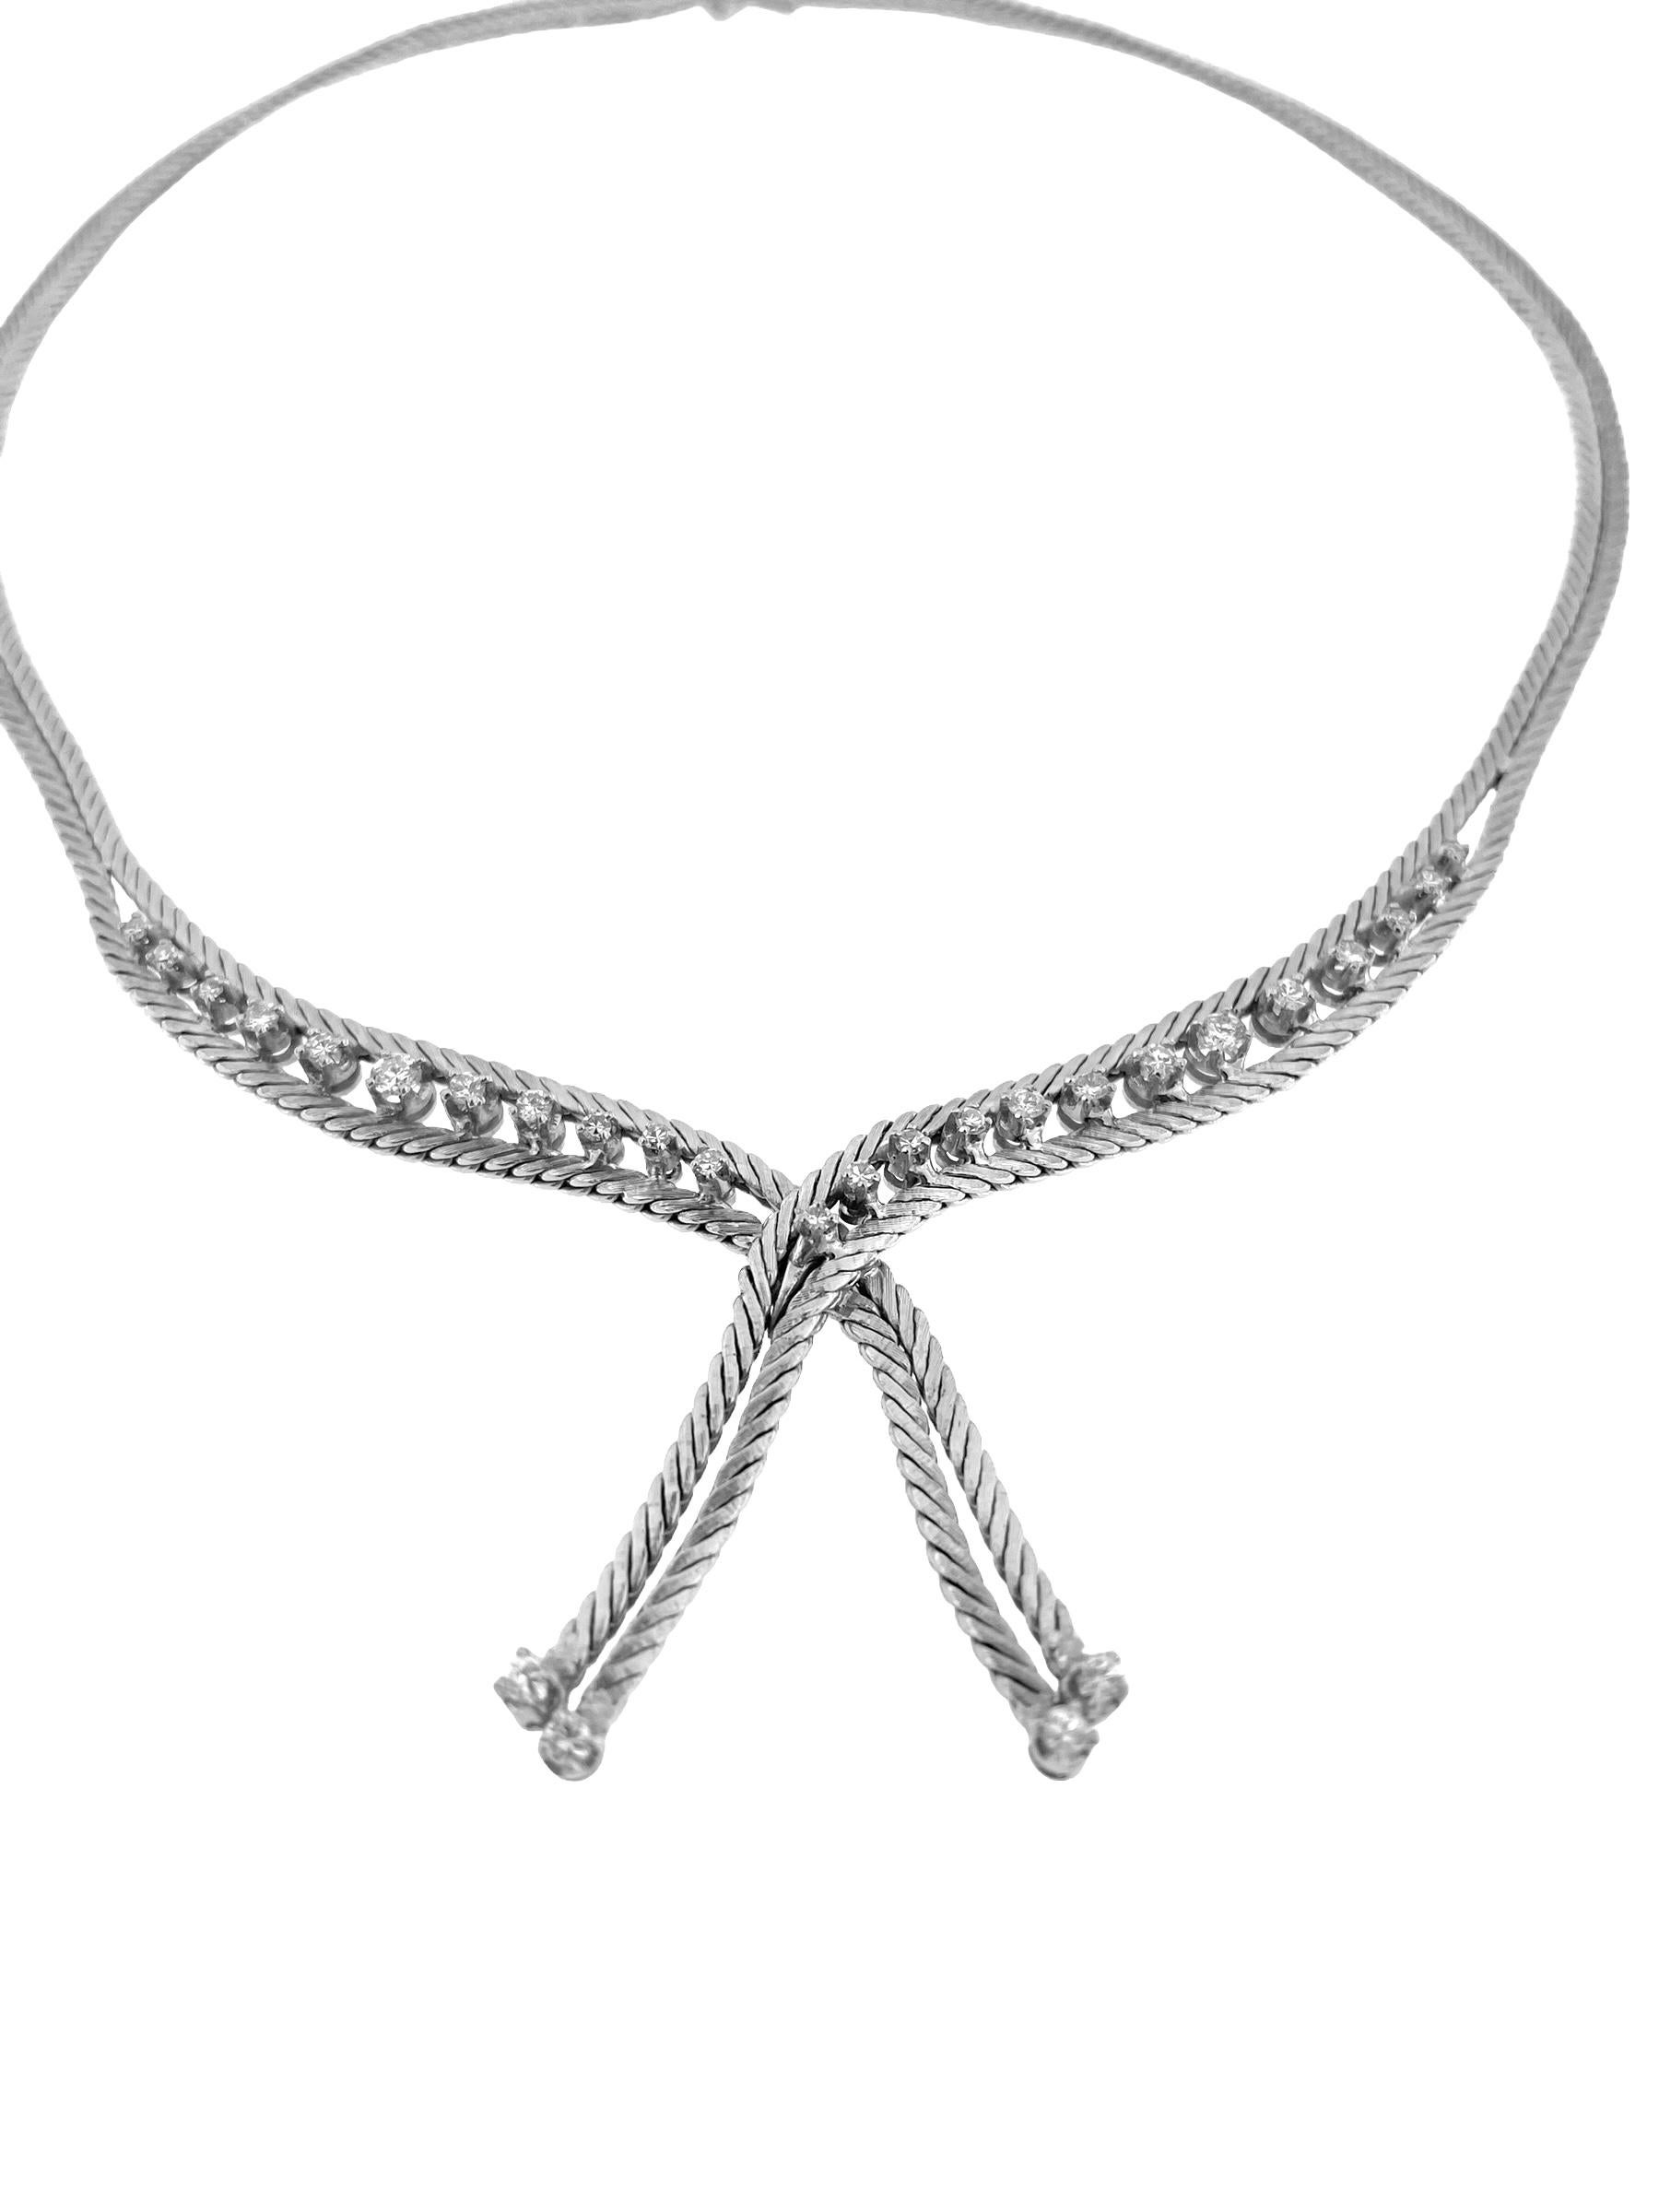 The Mid-Century White Gold Necklace with Diamonds is a timeless piece of jewelry that exudes elegance and sophistication. Crafted from lustrous 18kt white gold, this necklace features a classic design inspired by the iconic herringbone work